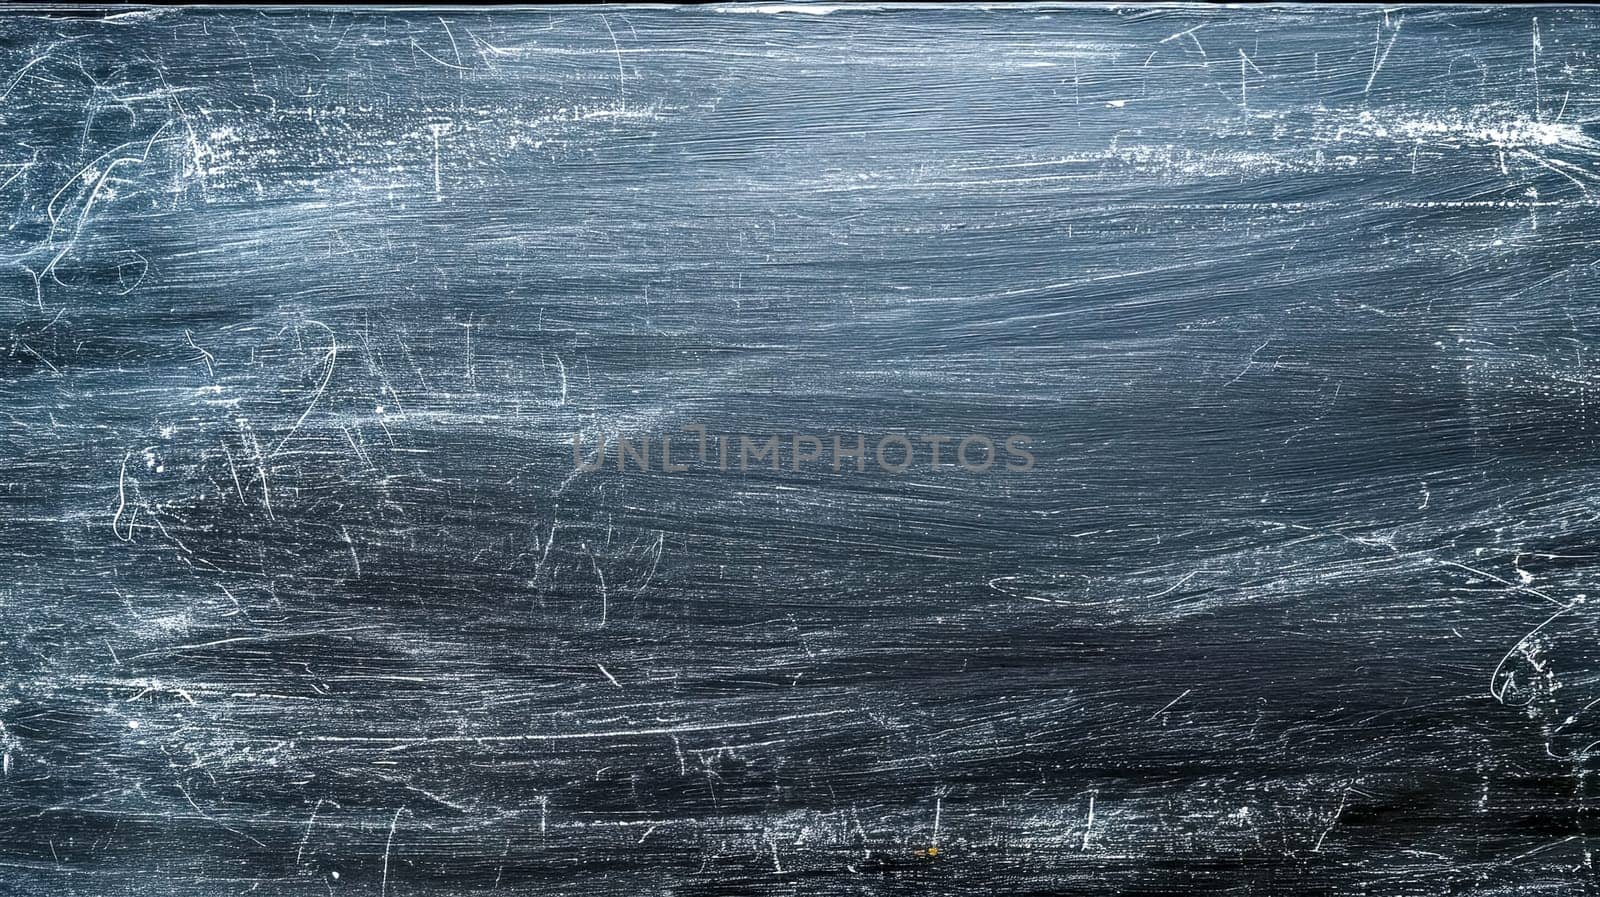 A used black chalkboard fills the image, showcasing the remnants of white chalk marks after erasure, giving it a textured appearance that's both dynamic and familiar. by Edophoto